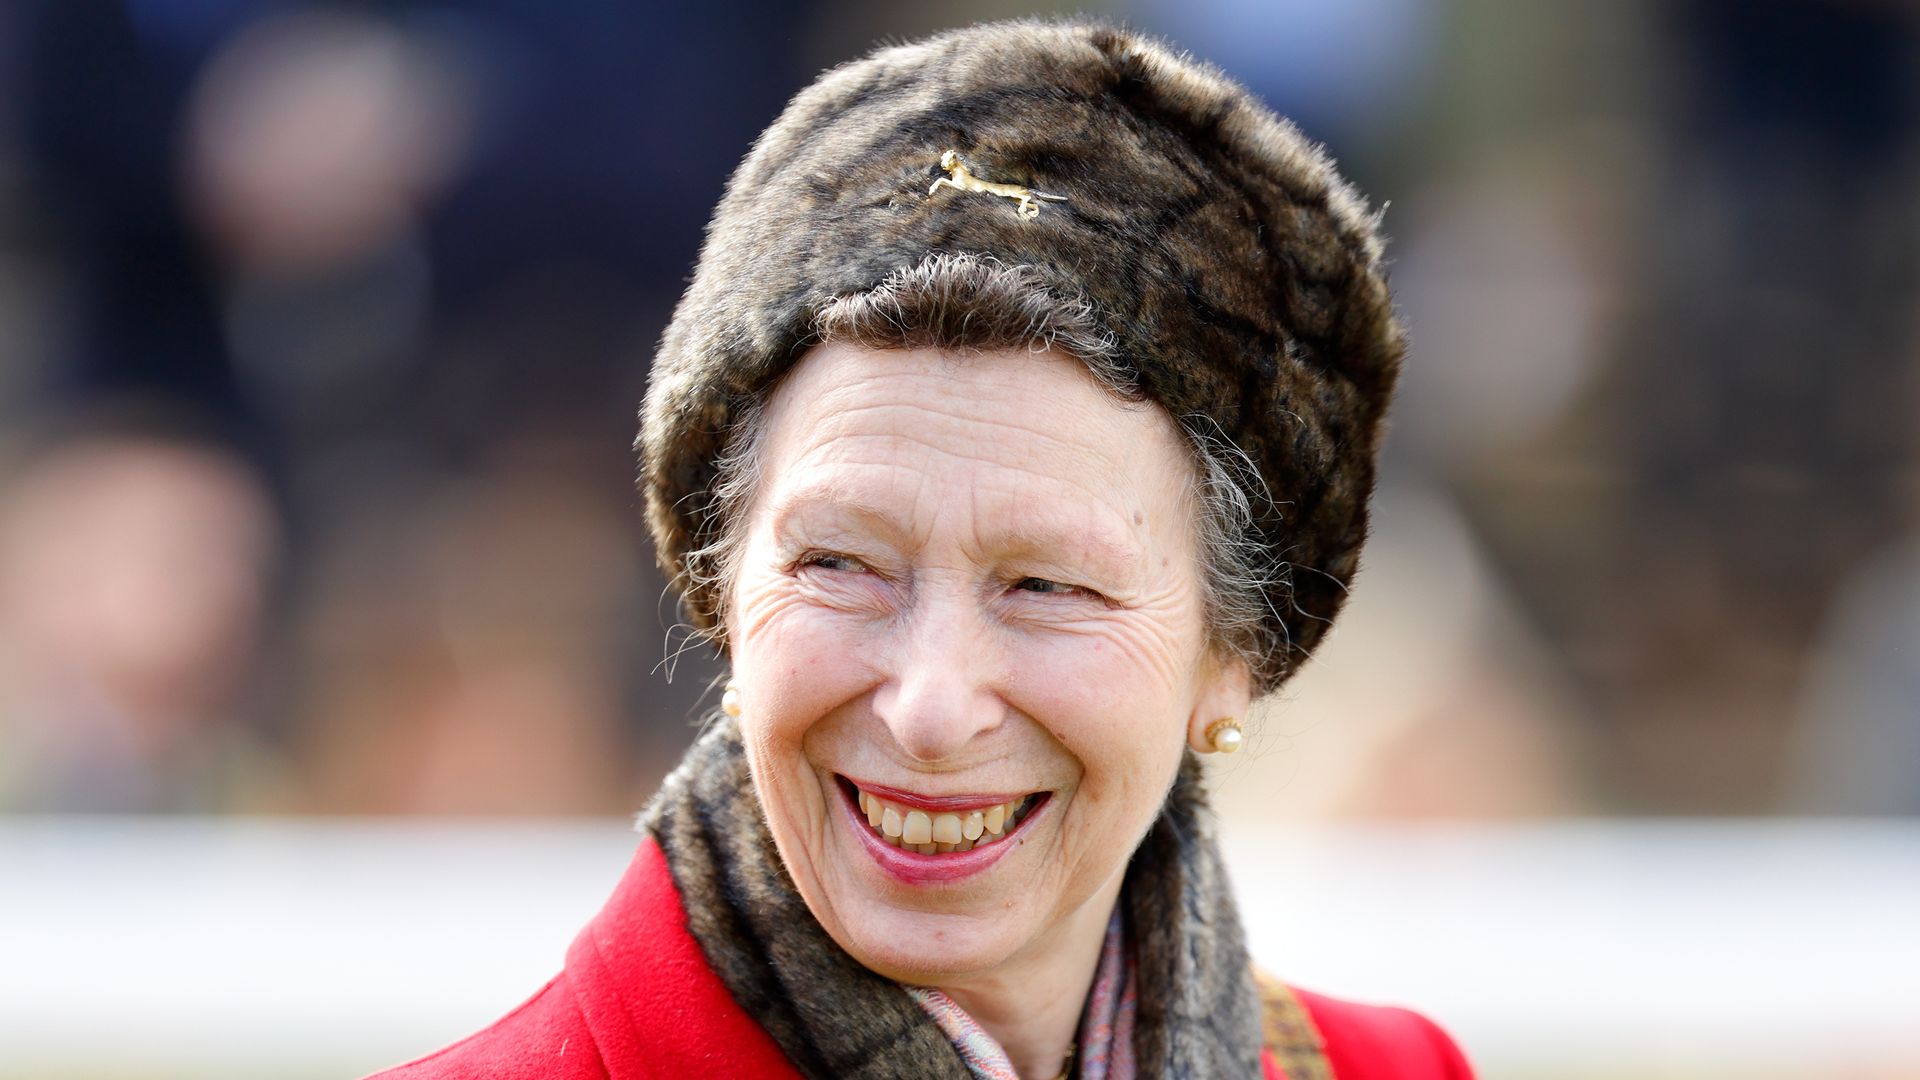 Princess Anne smiling in fur hat and red coat